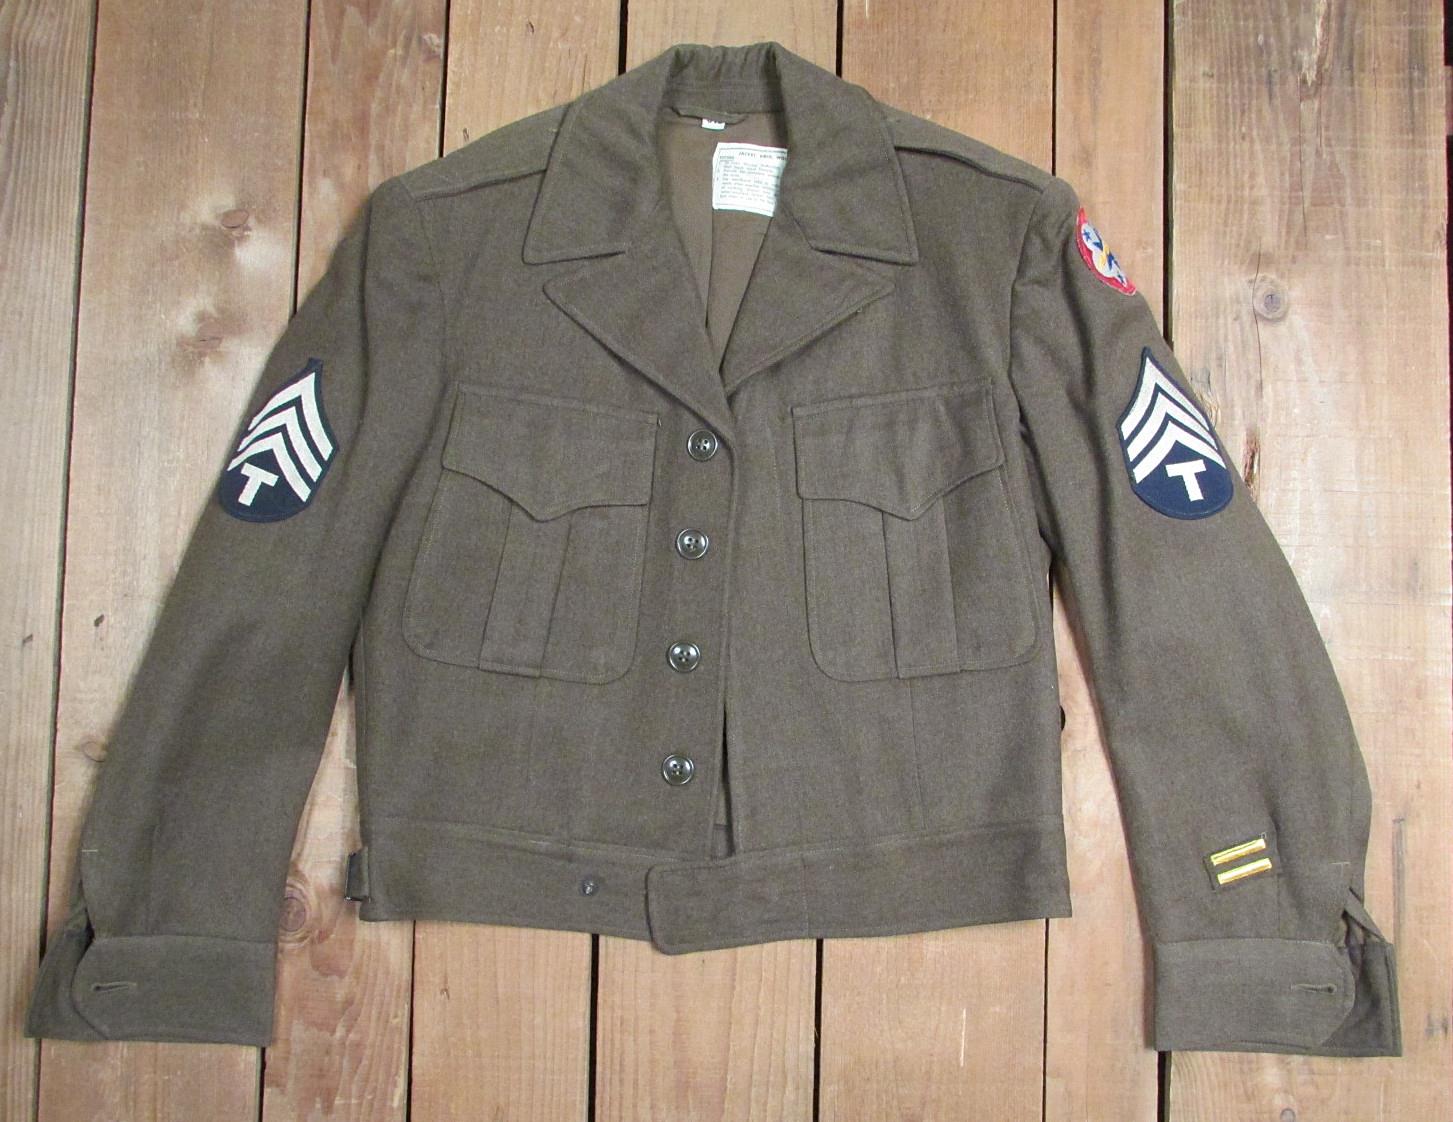 Vintage Wwii Us Army Wool M 1943 Field Jacket Military 1940s Patches Sz